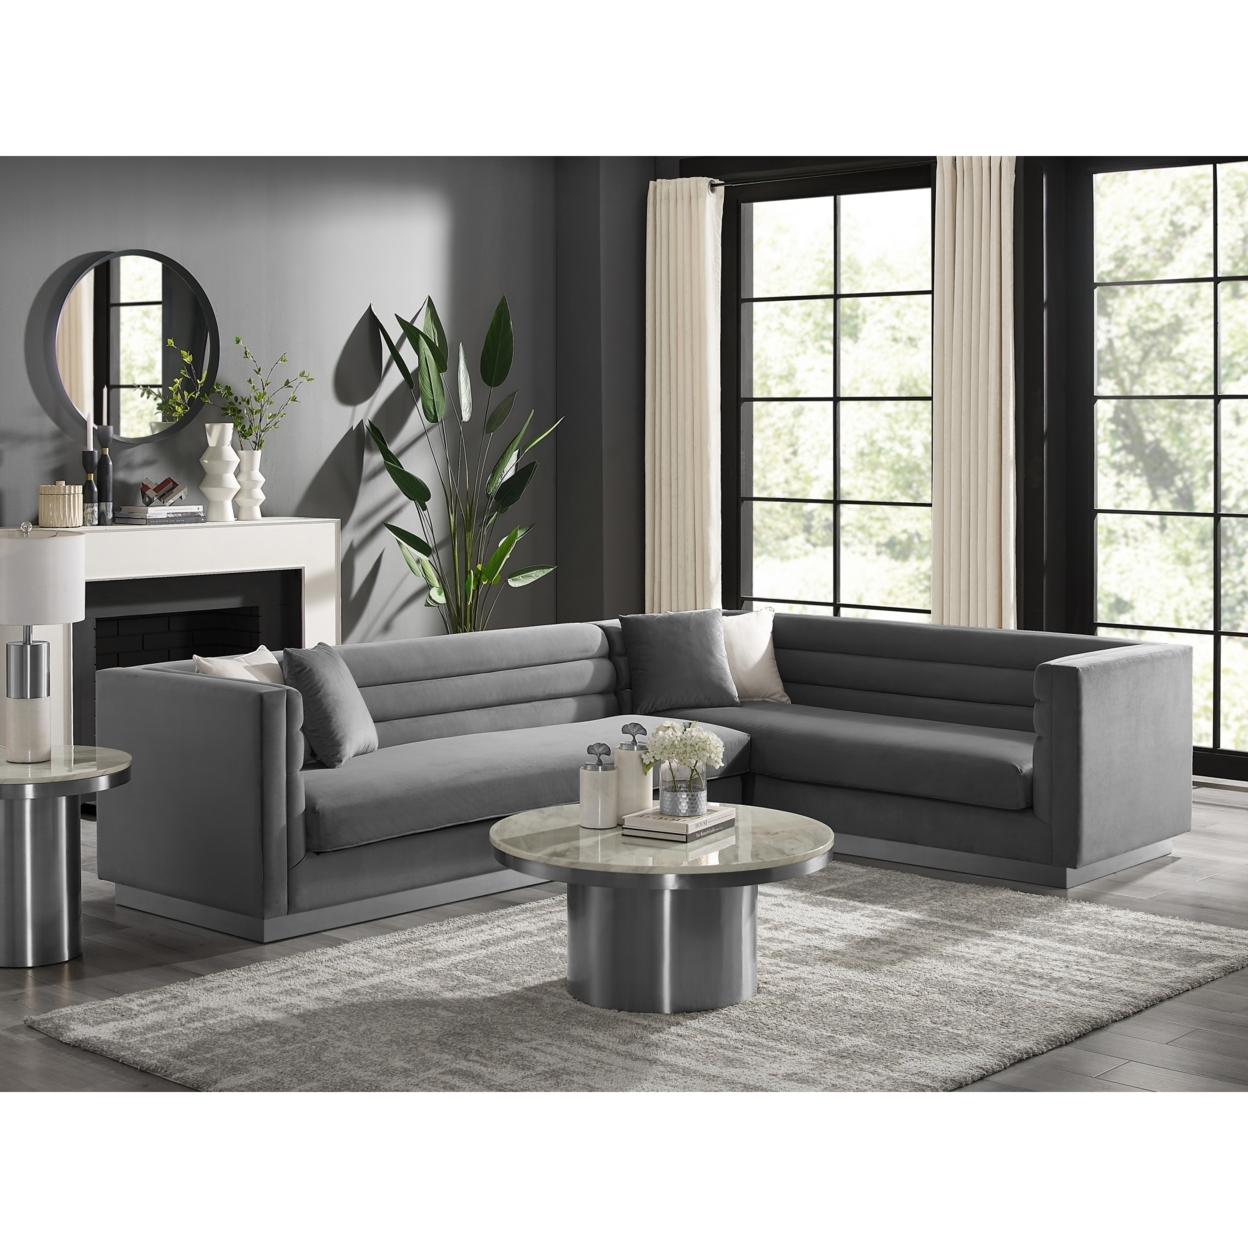 Aja Sofa-Upholstered-Metal Base, Sectional-Square Arms-Horizontal Channel Tufting - dark grey